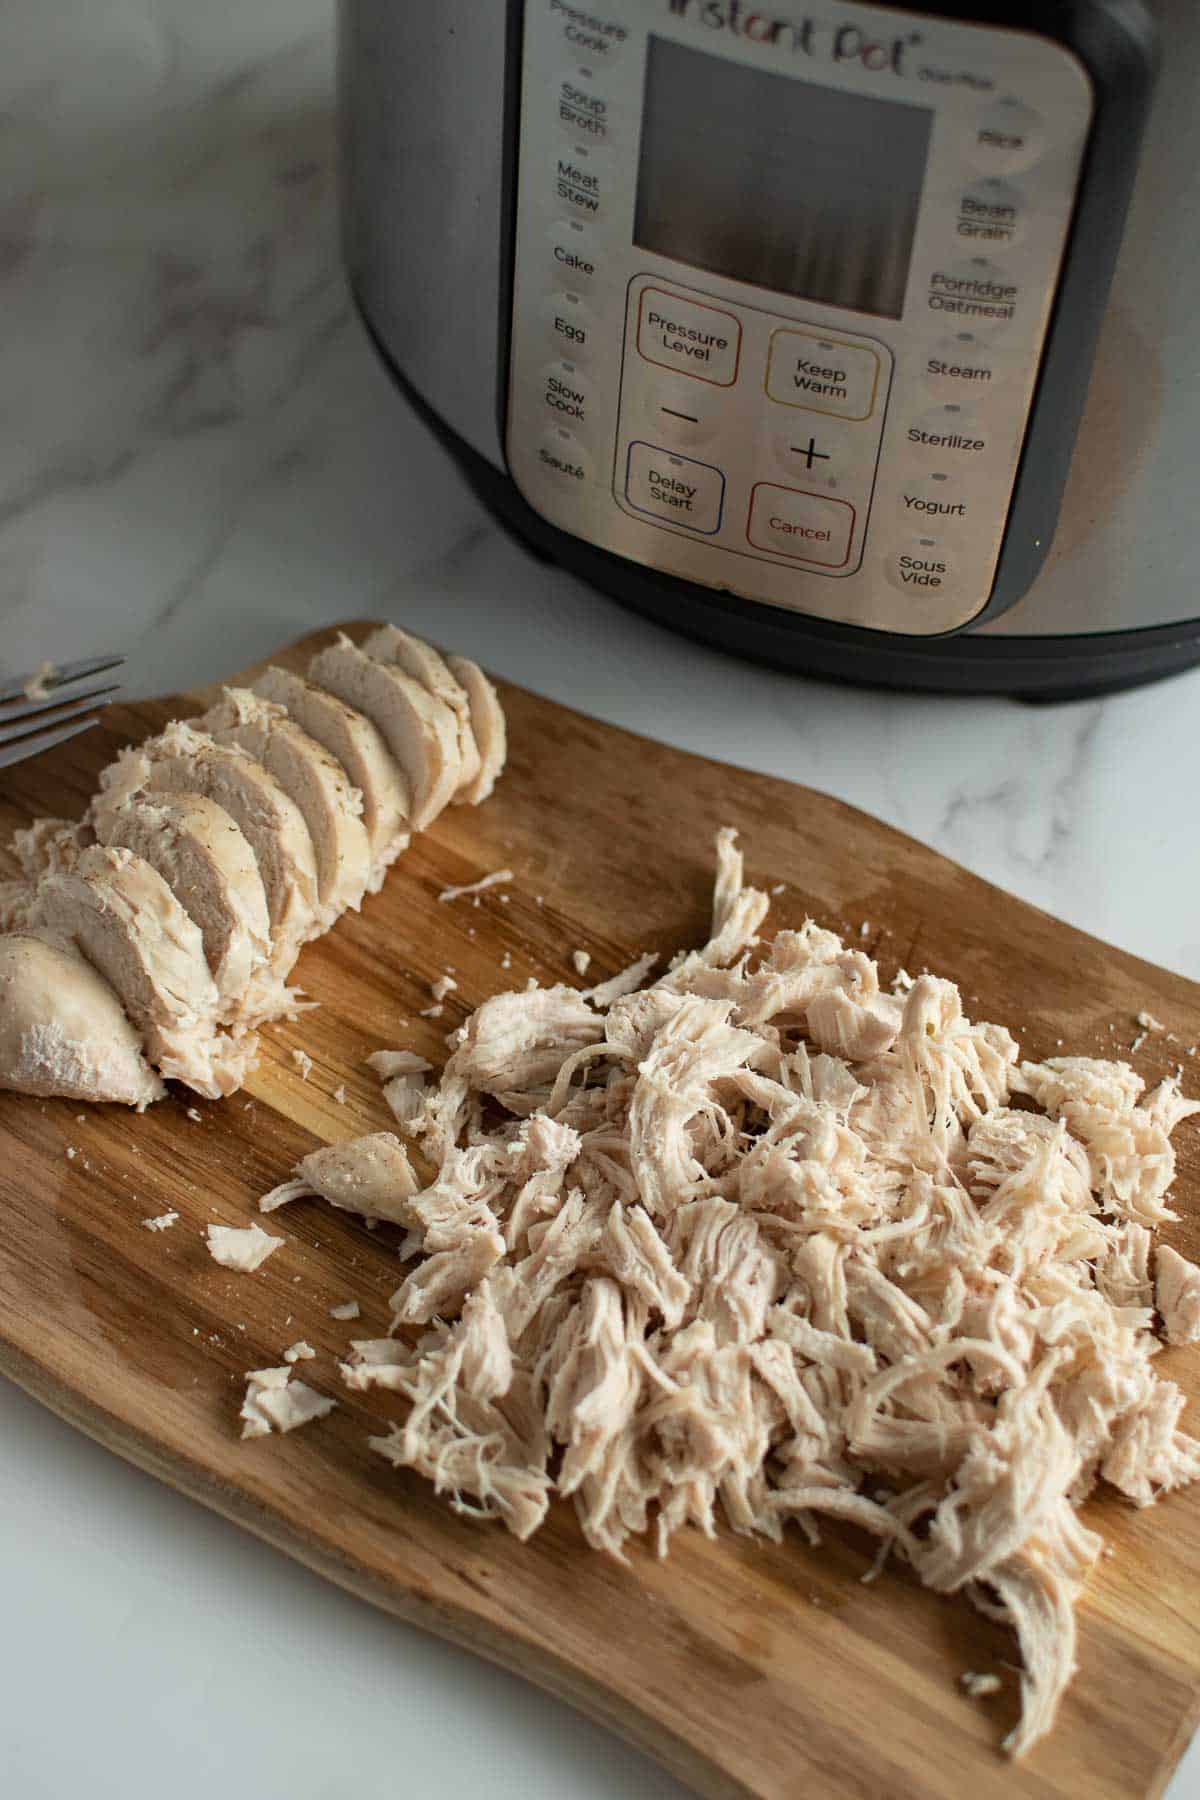 Shredded chicken on a chopping board in front of an instant pot.